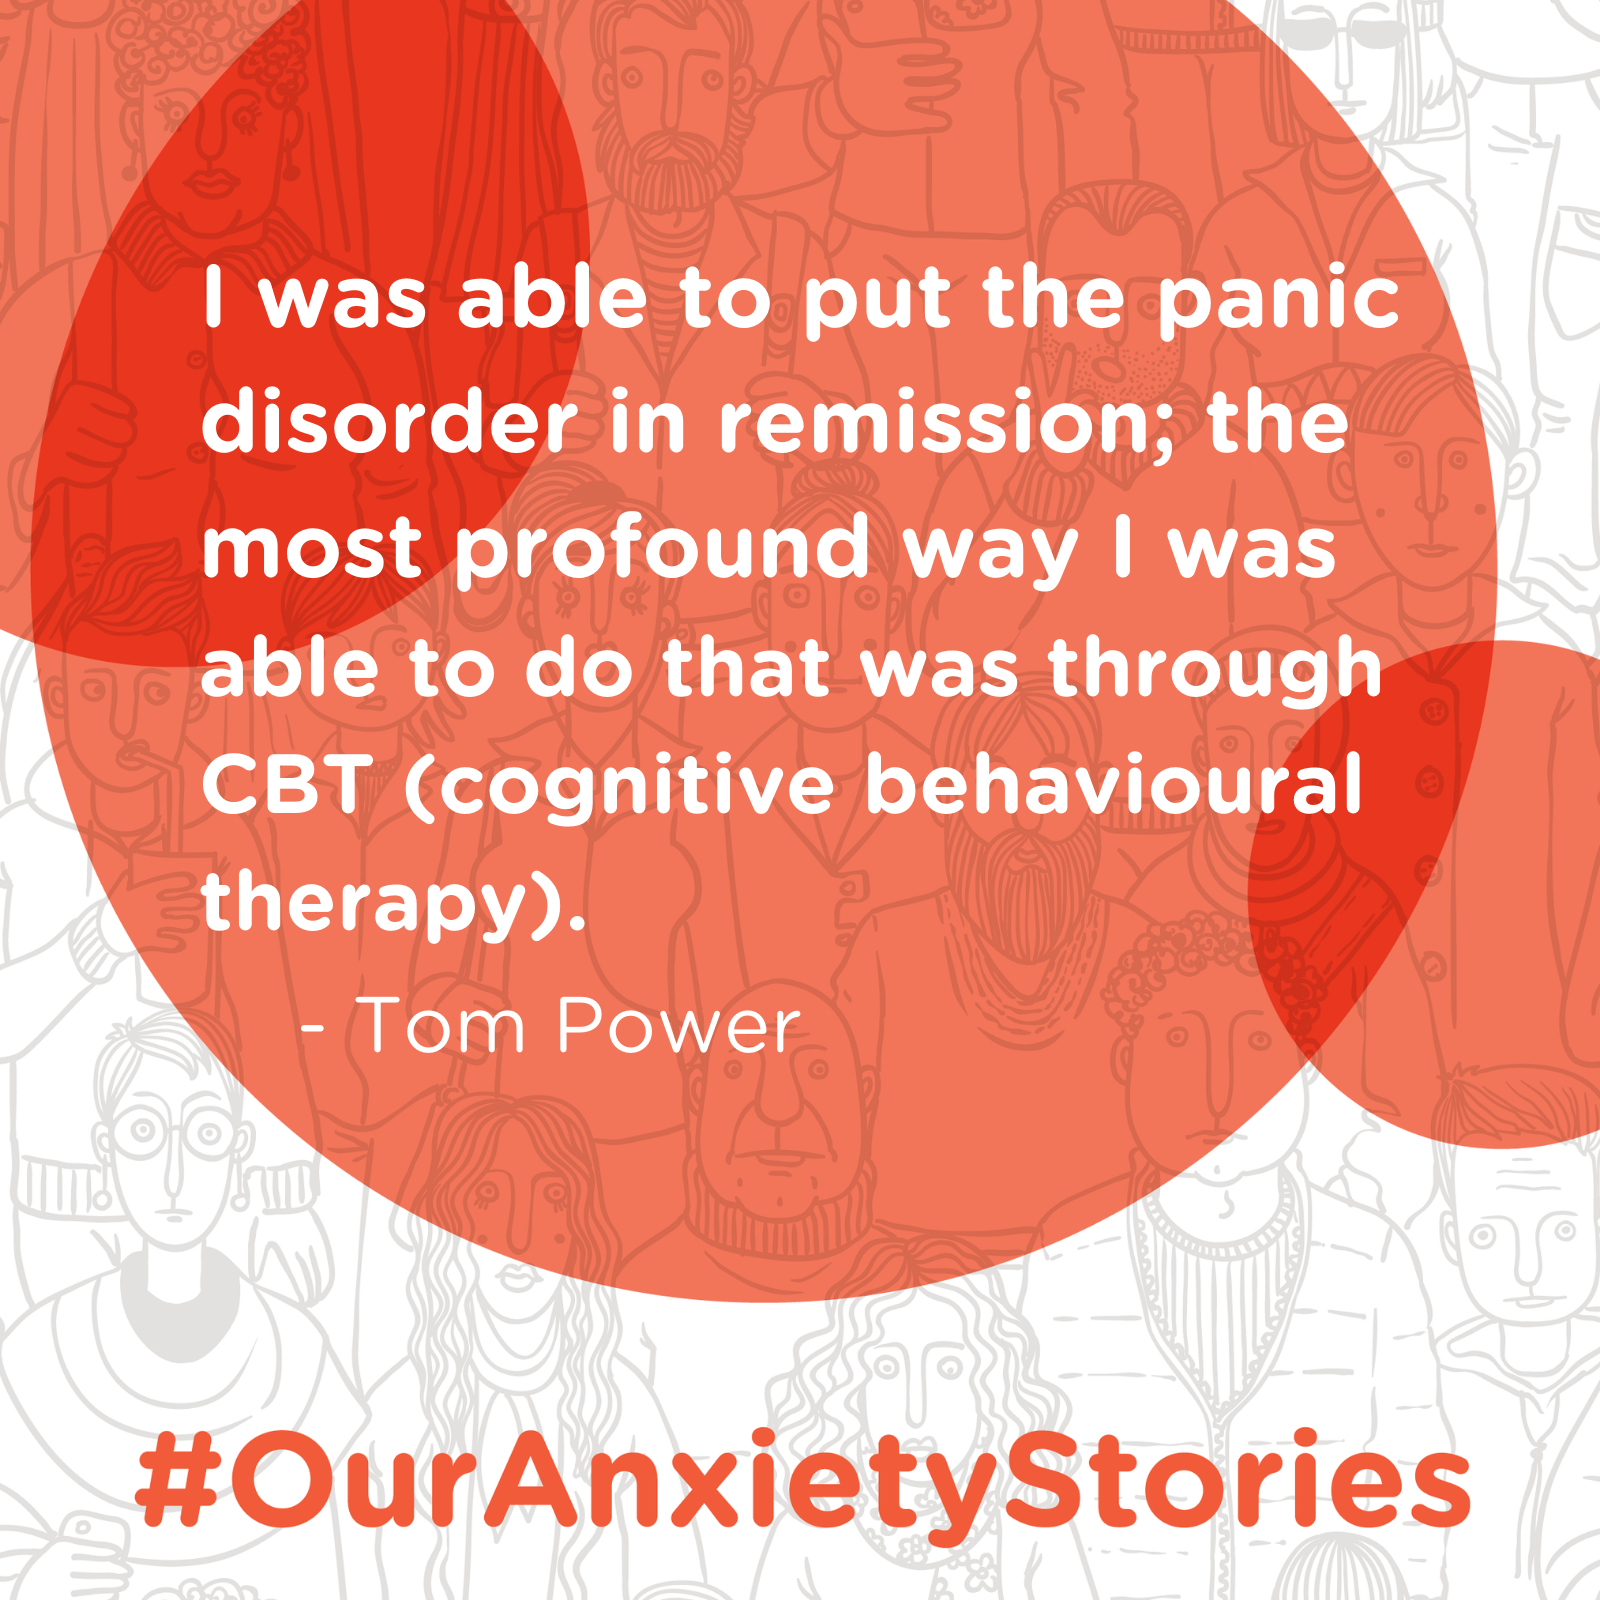 Quote from Tom Power: ": I was able to put the panic disorder in remission. The most profound way I was able to do that was through CBT (cognitive behavioural therapy)."